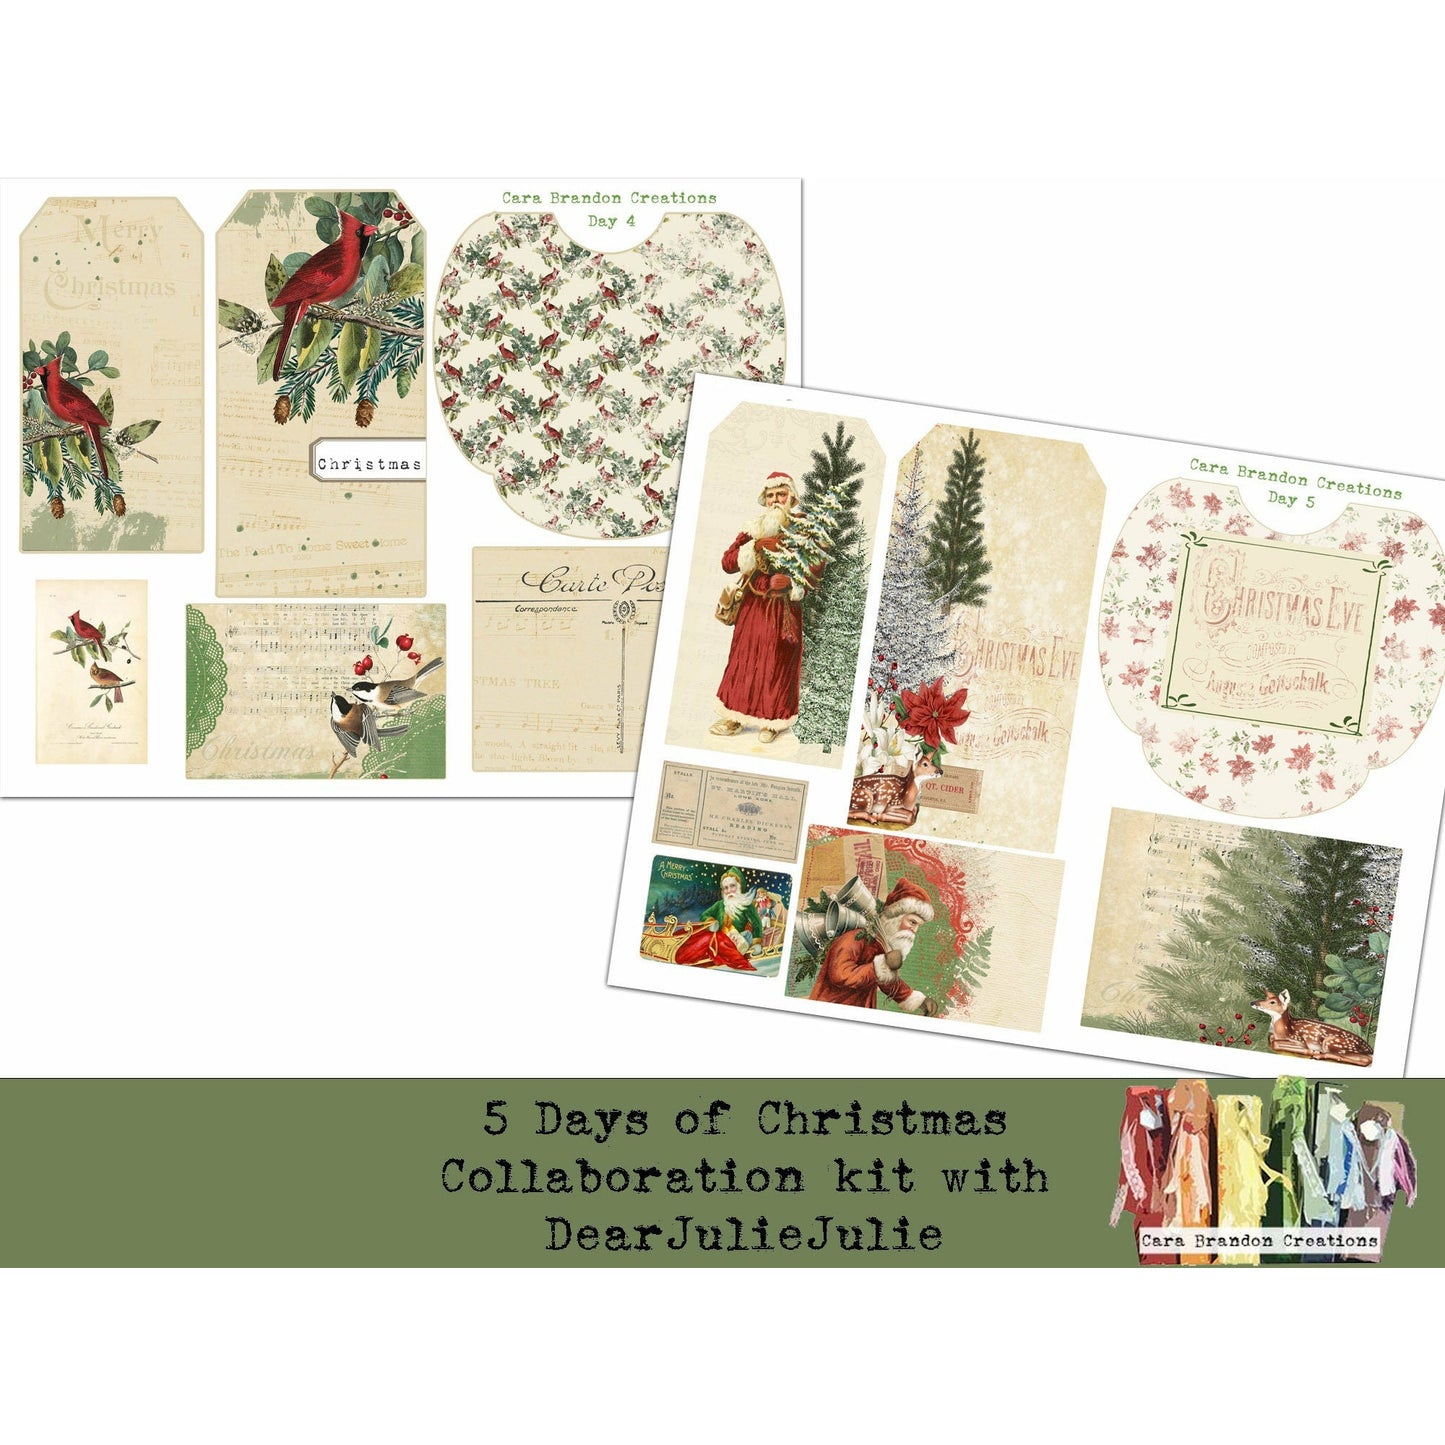 Rustic Christmas 5 Days of Christmas Collaboration kit with DearJulieJulie